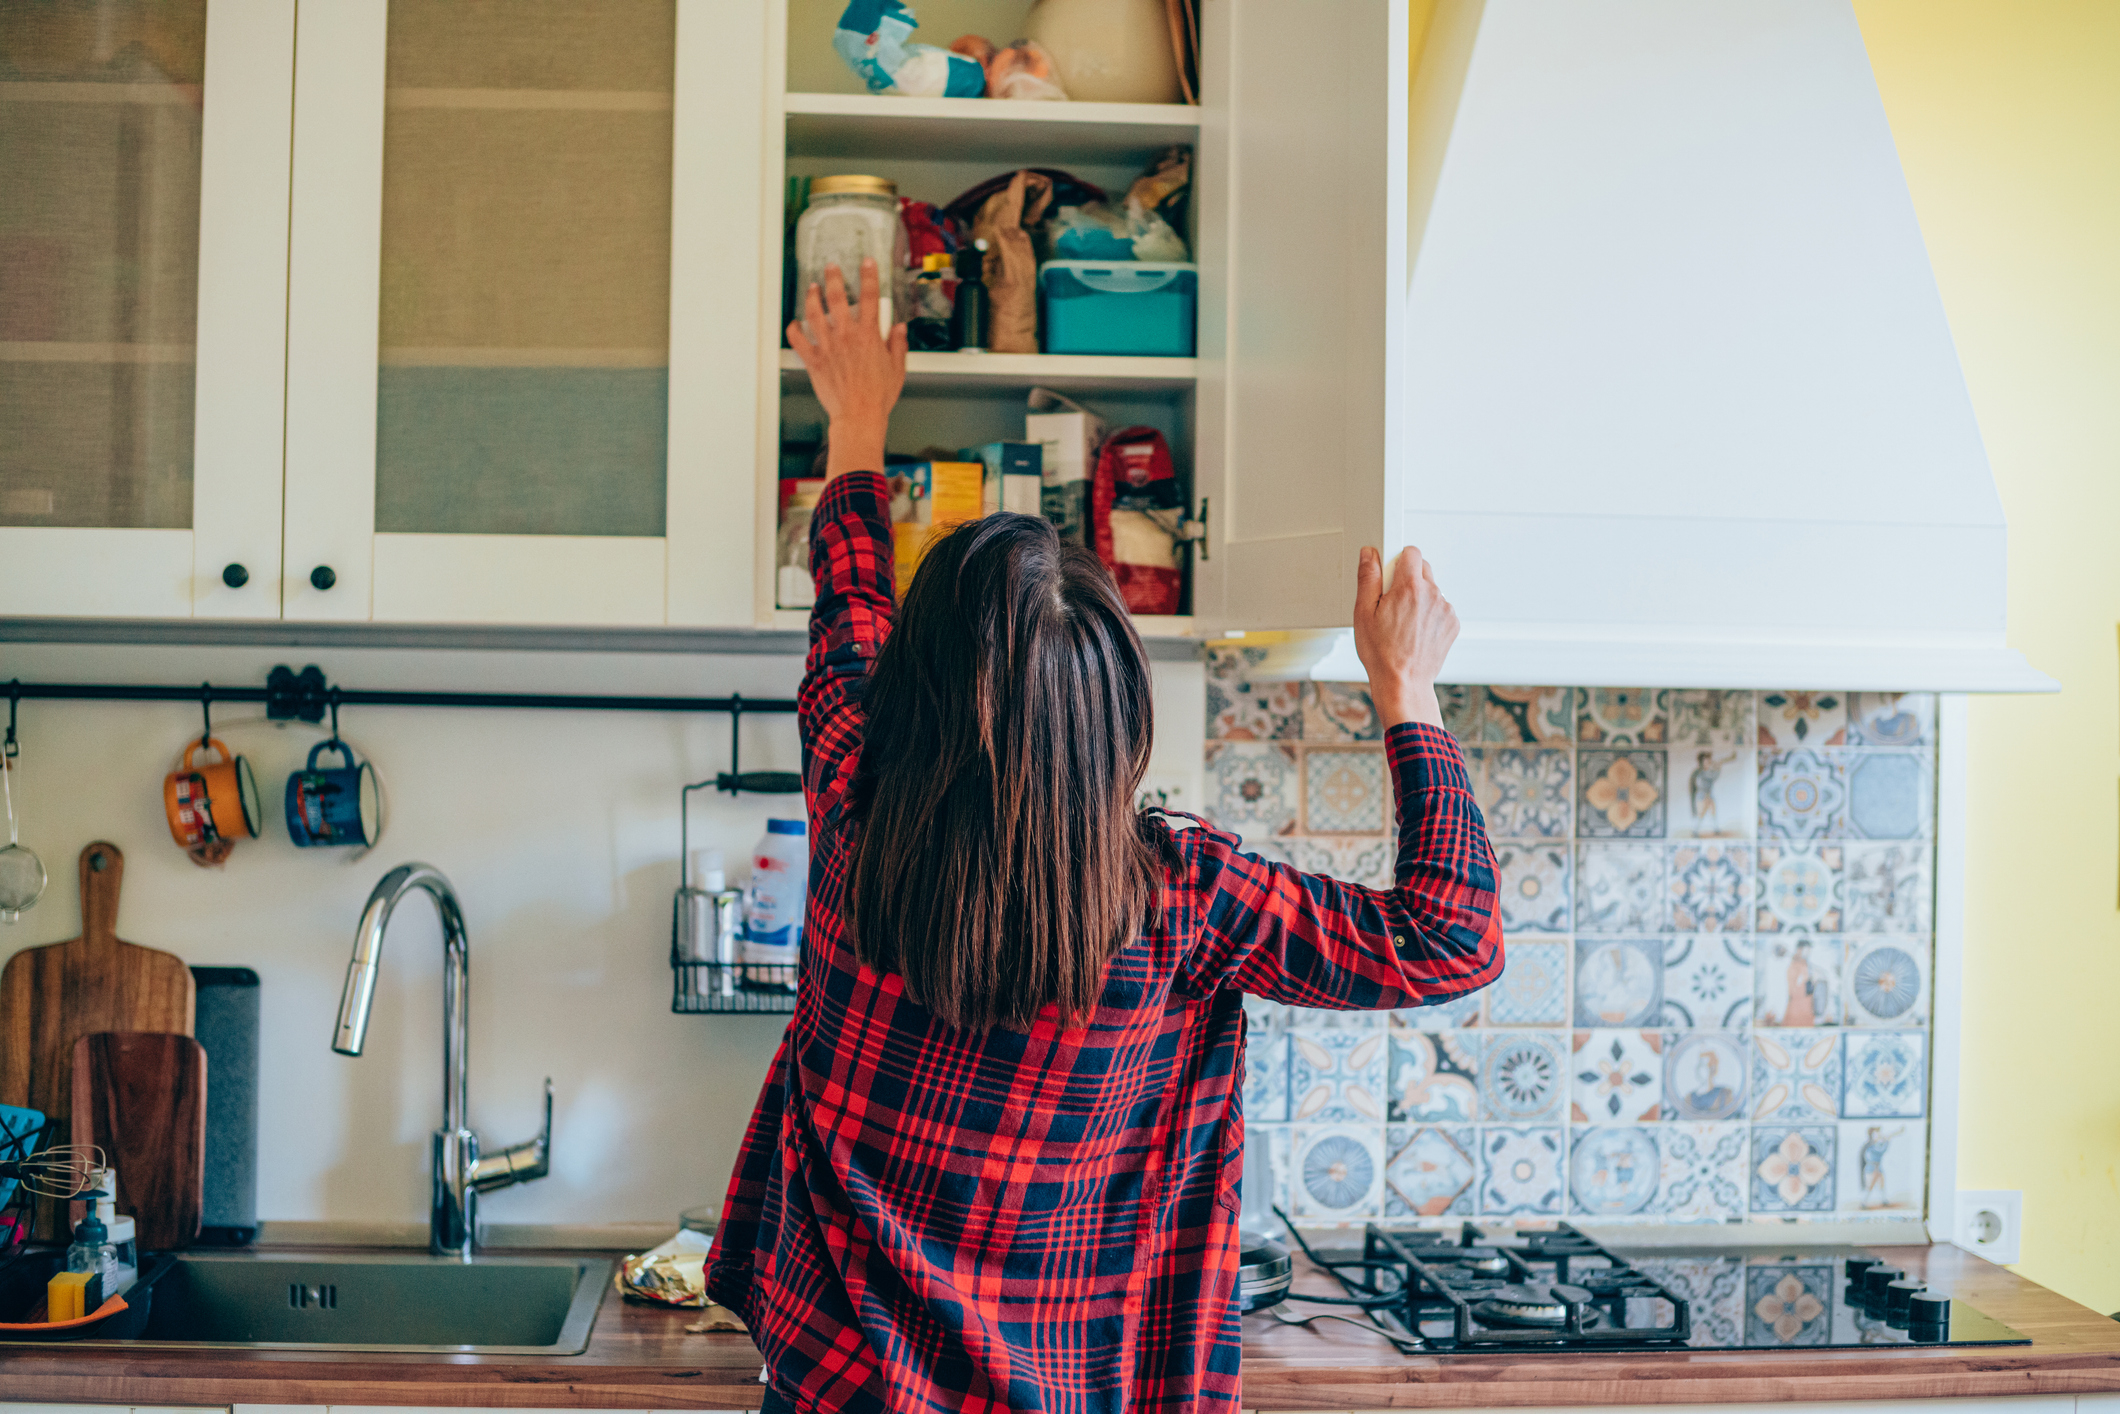 Person in plaid shirt reaching for an item in a kitchen cabinet